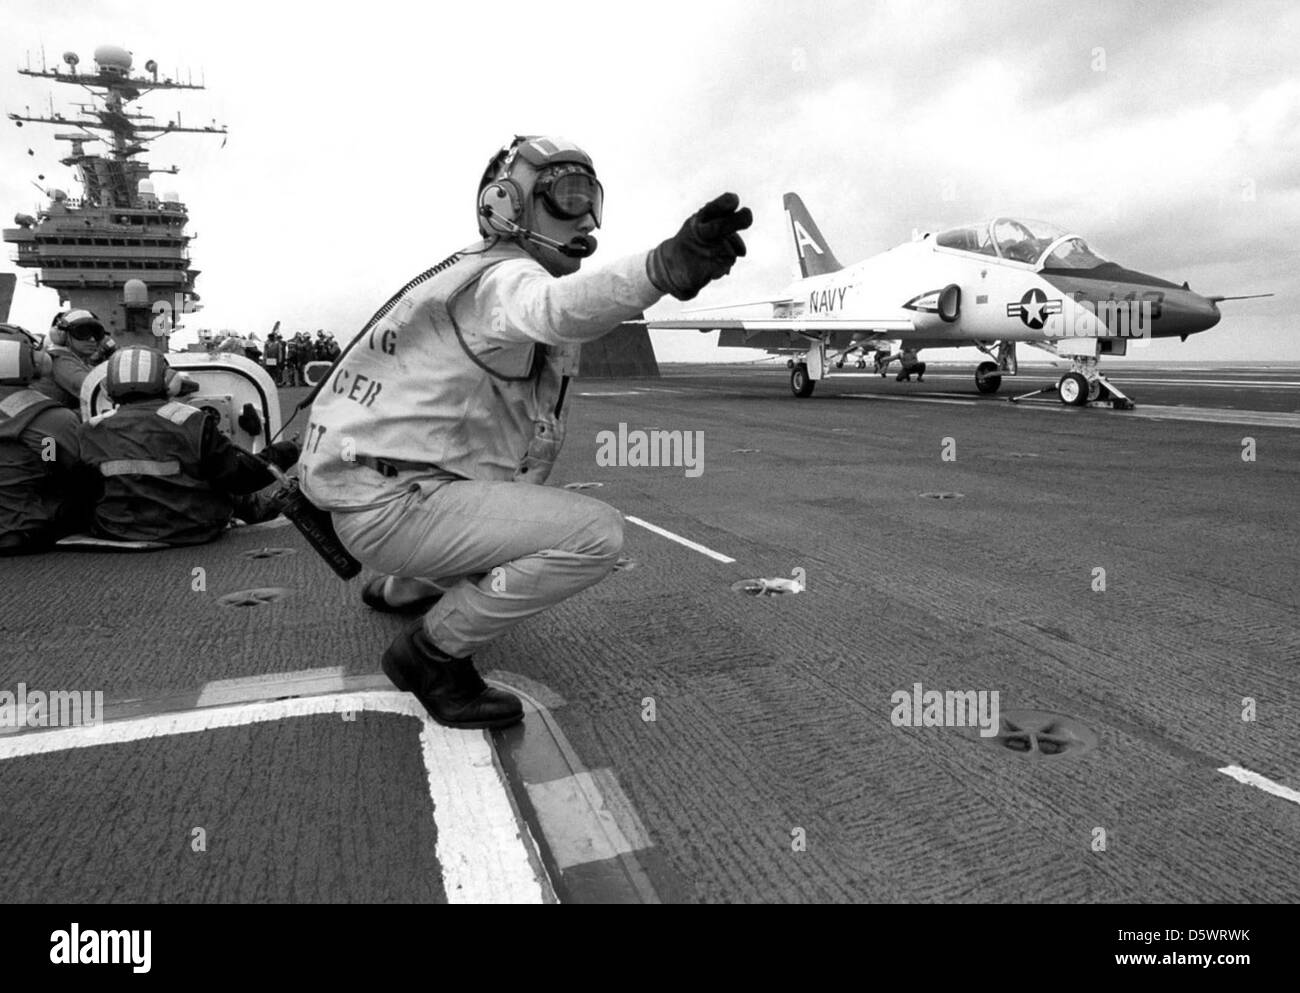 US Navy (USN) Lieutenant Commander (LCDR) Sherman Scott, a Aircraft Handling Officer, gives the launch signal to a USN T-45A Goshawk aircraft from Training Squadron Seven (VT-7), as the aircraft prepares to launch, during final qualifications aboard the USN Aircraft Carrier USS GEORGE WASHINGTON (CVN-73). Stock Photo